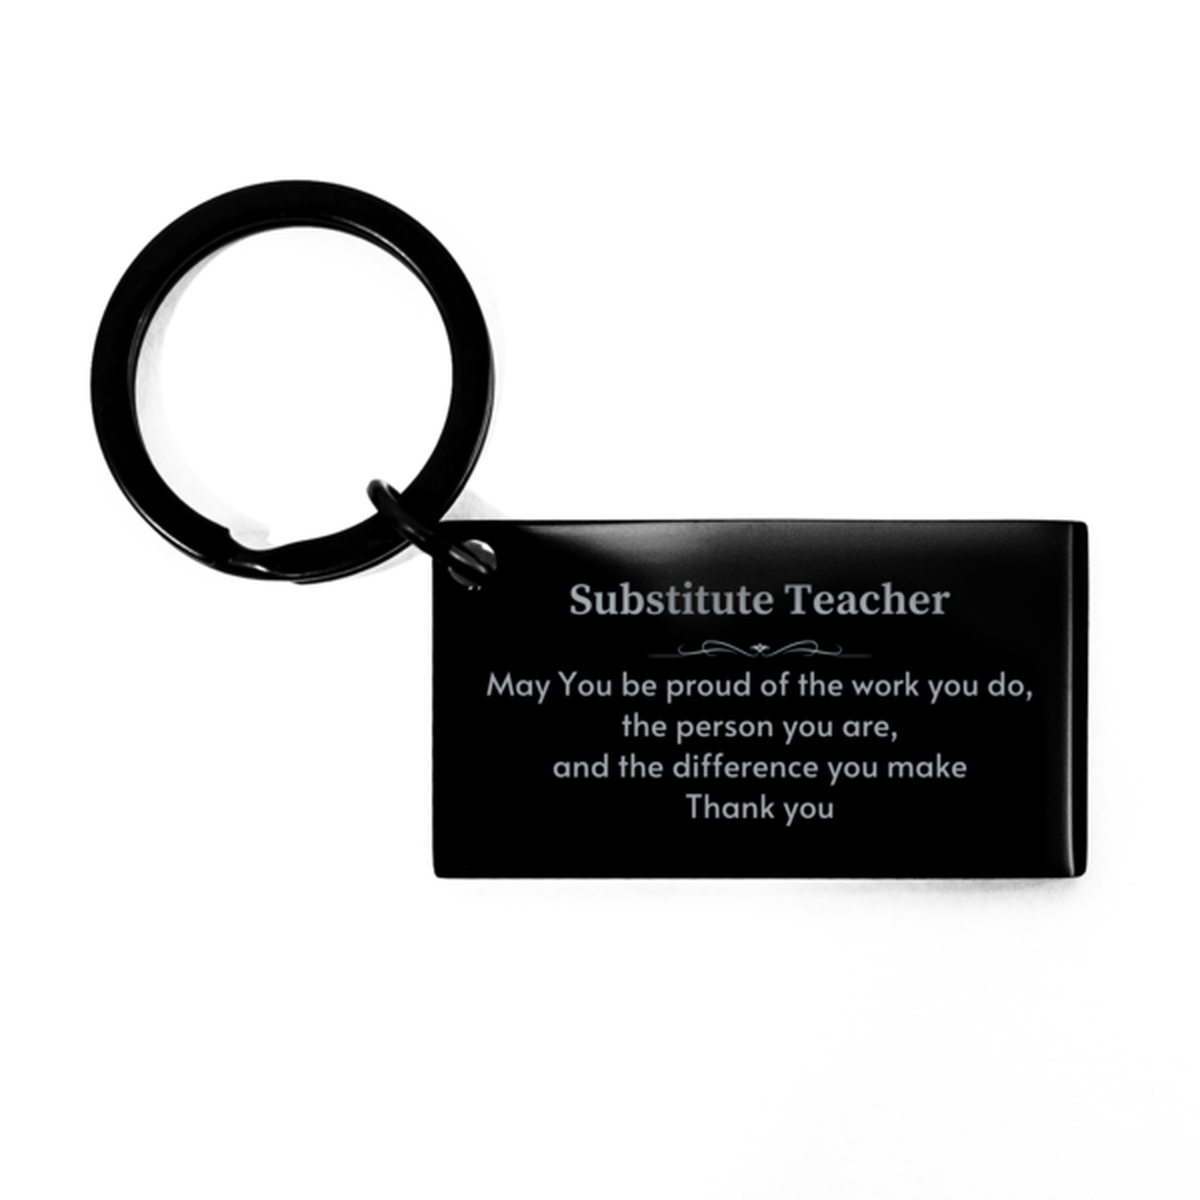 Heartwarming Keychain Retirement Coworkers Gifts for Substitute Teacher, Warehouse Clerk May You be proud of the work you do, the person you are Gifts for Boss Men Women Friends